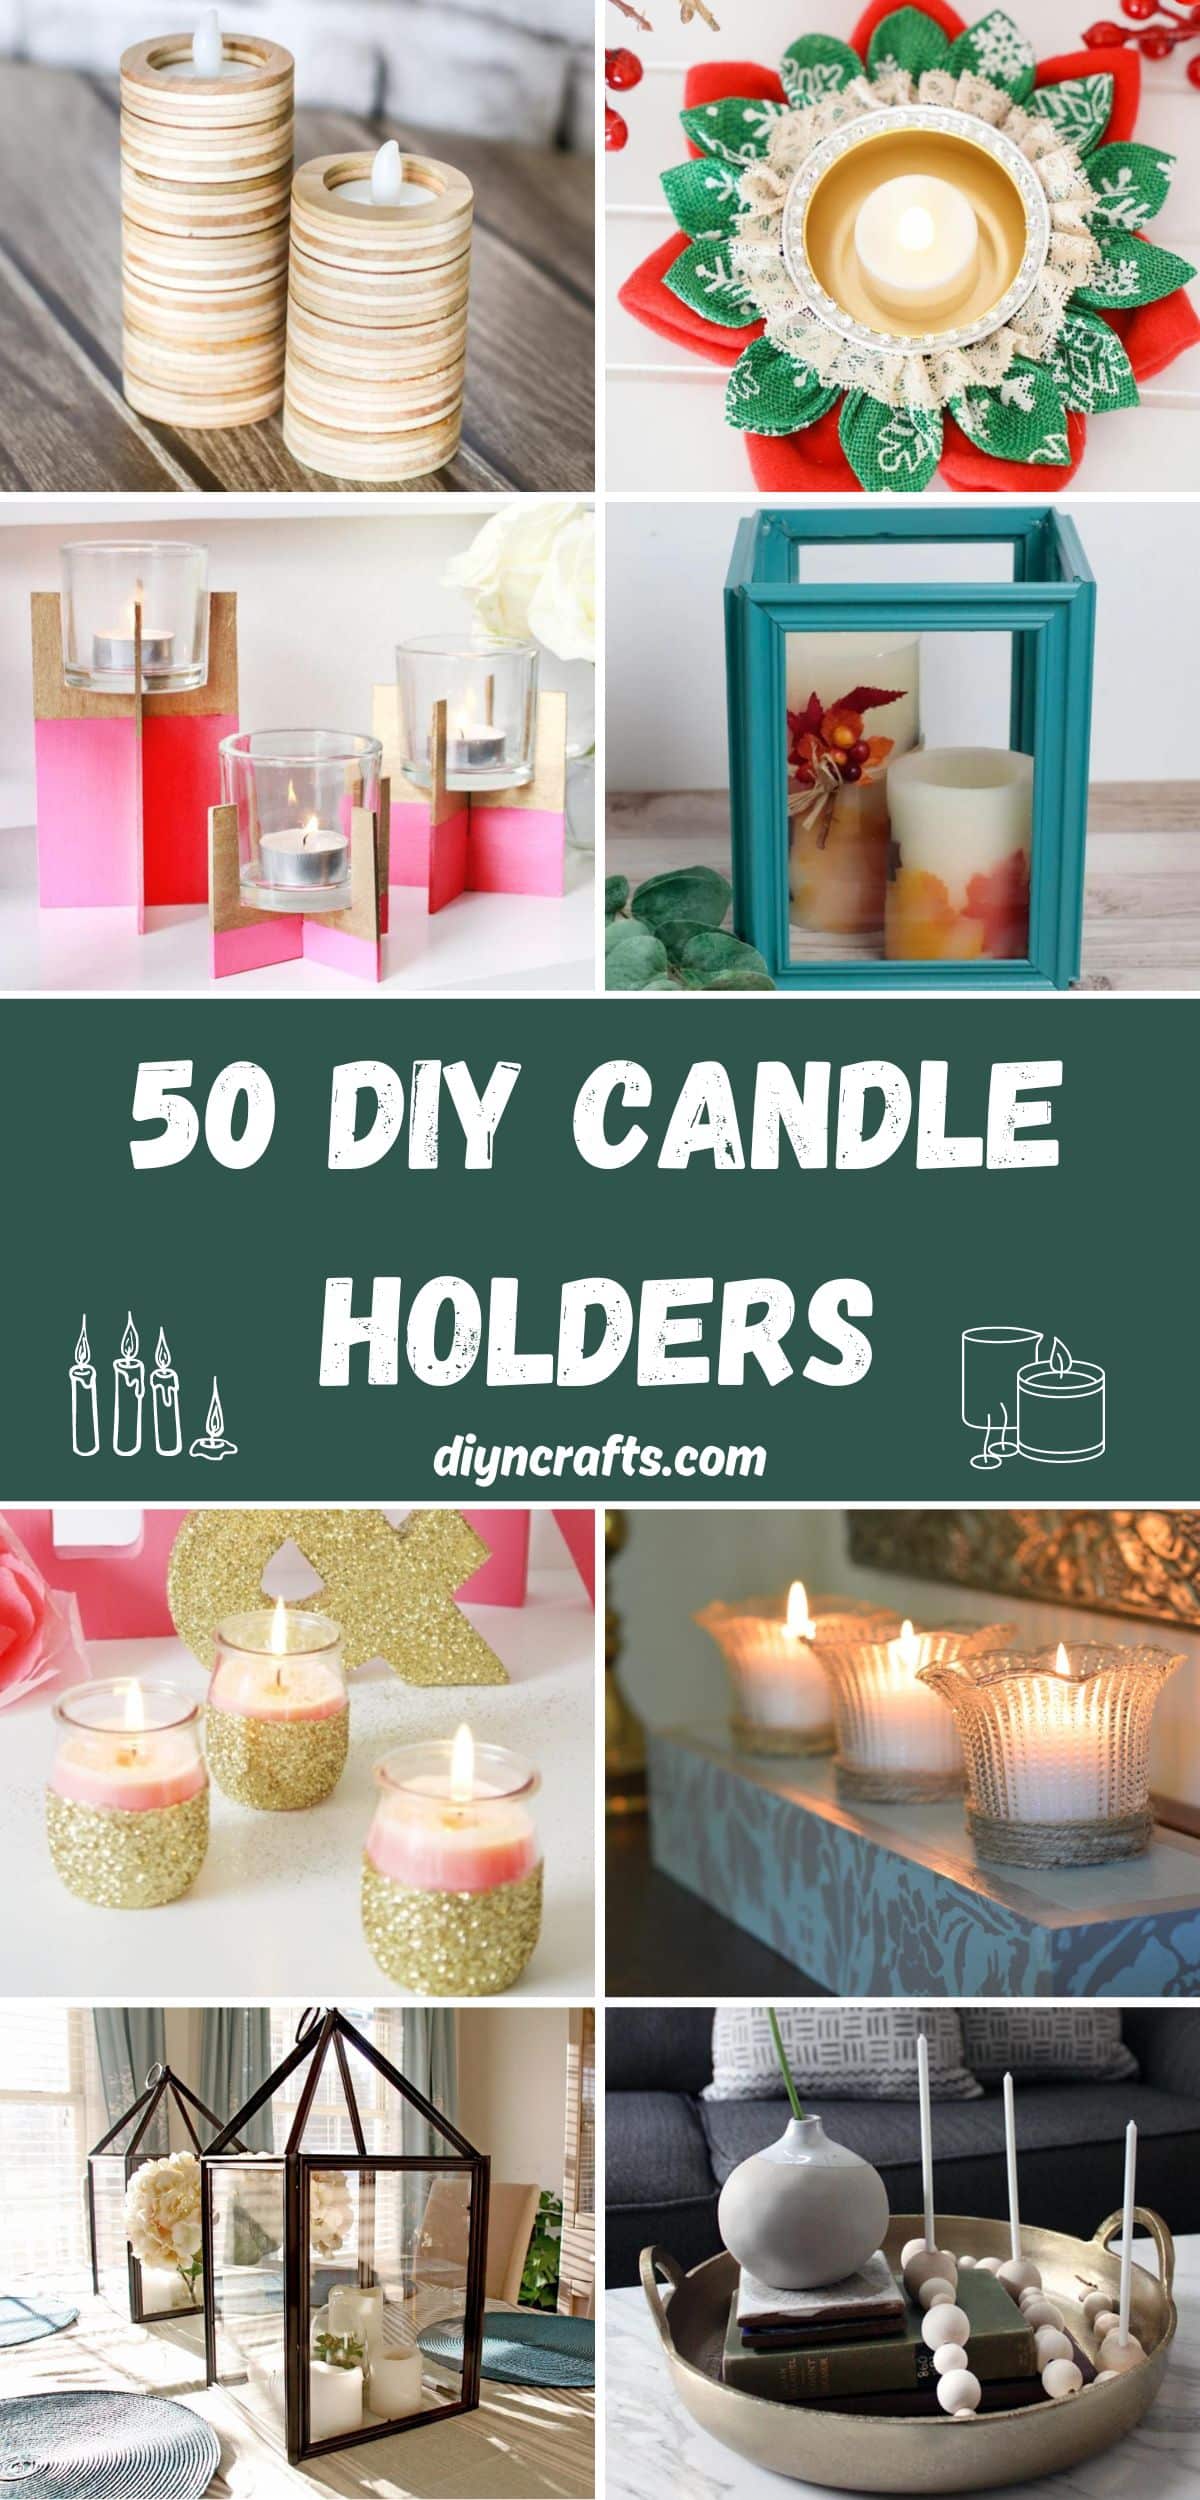 50 DIY Candle Holders collage.